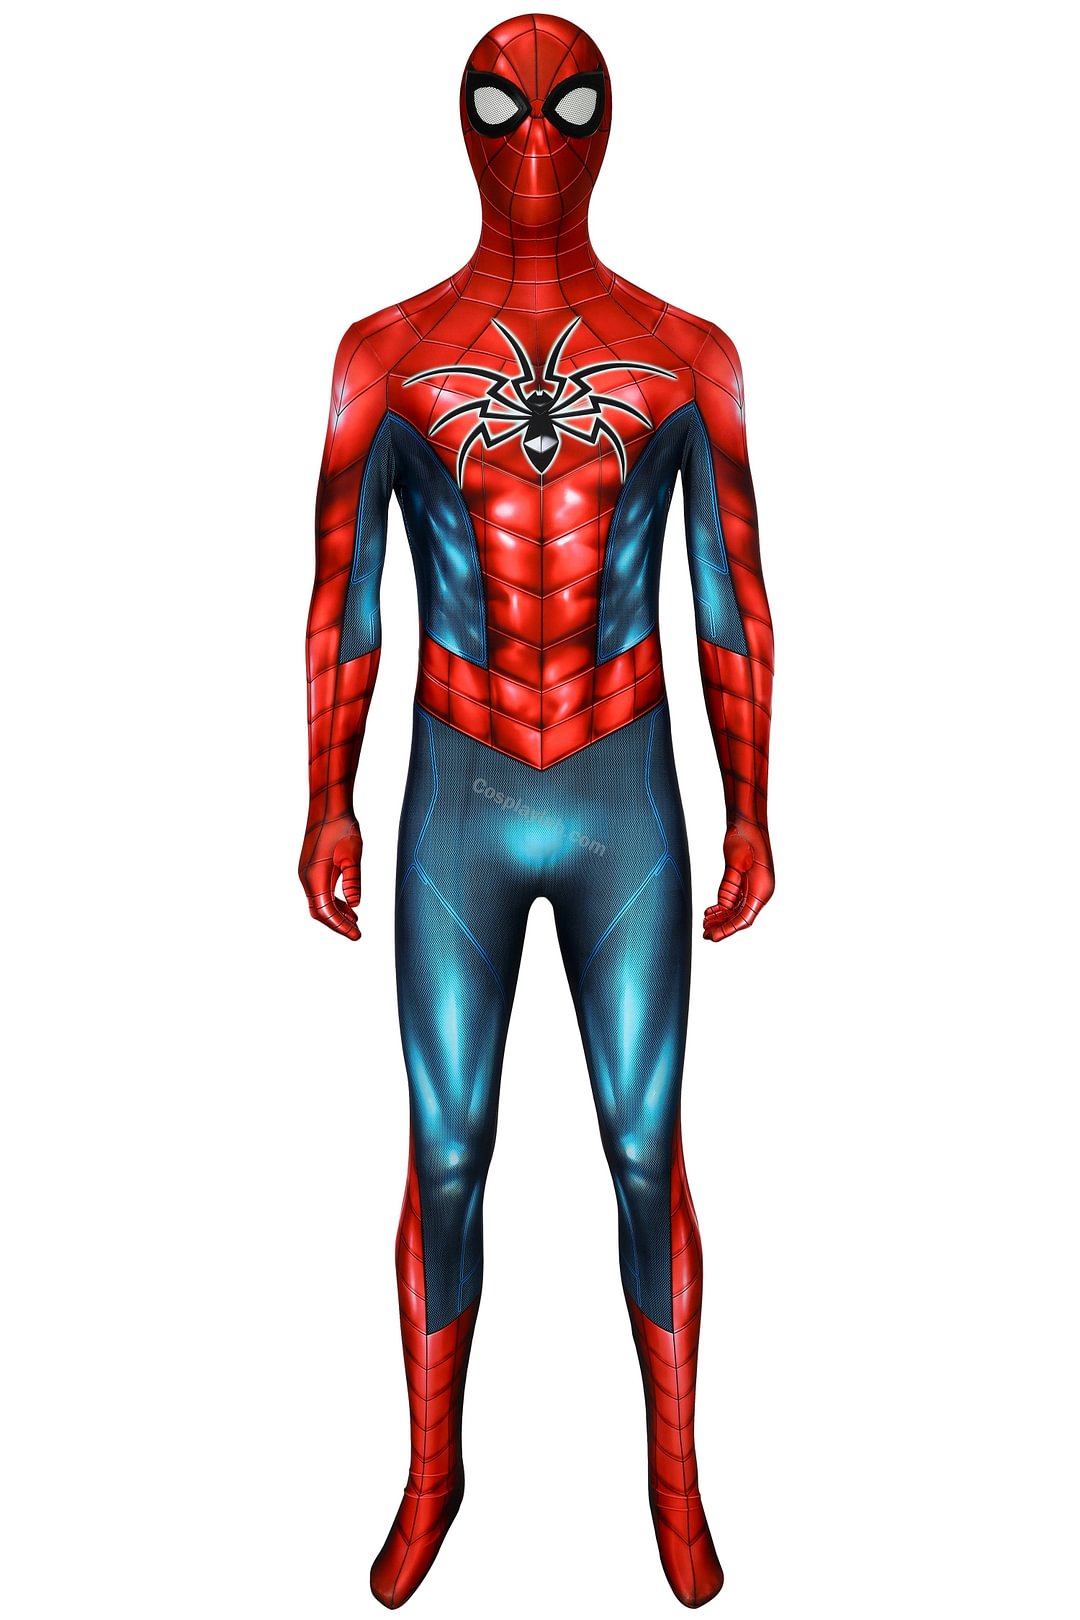 Spider-man Cosplay Suit Spider-Armor MK IV HQ Printed Edition Spandex Costume Jumpsuit